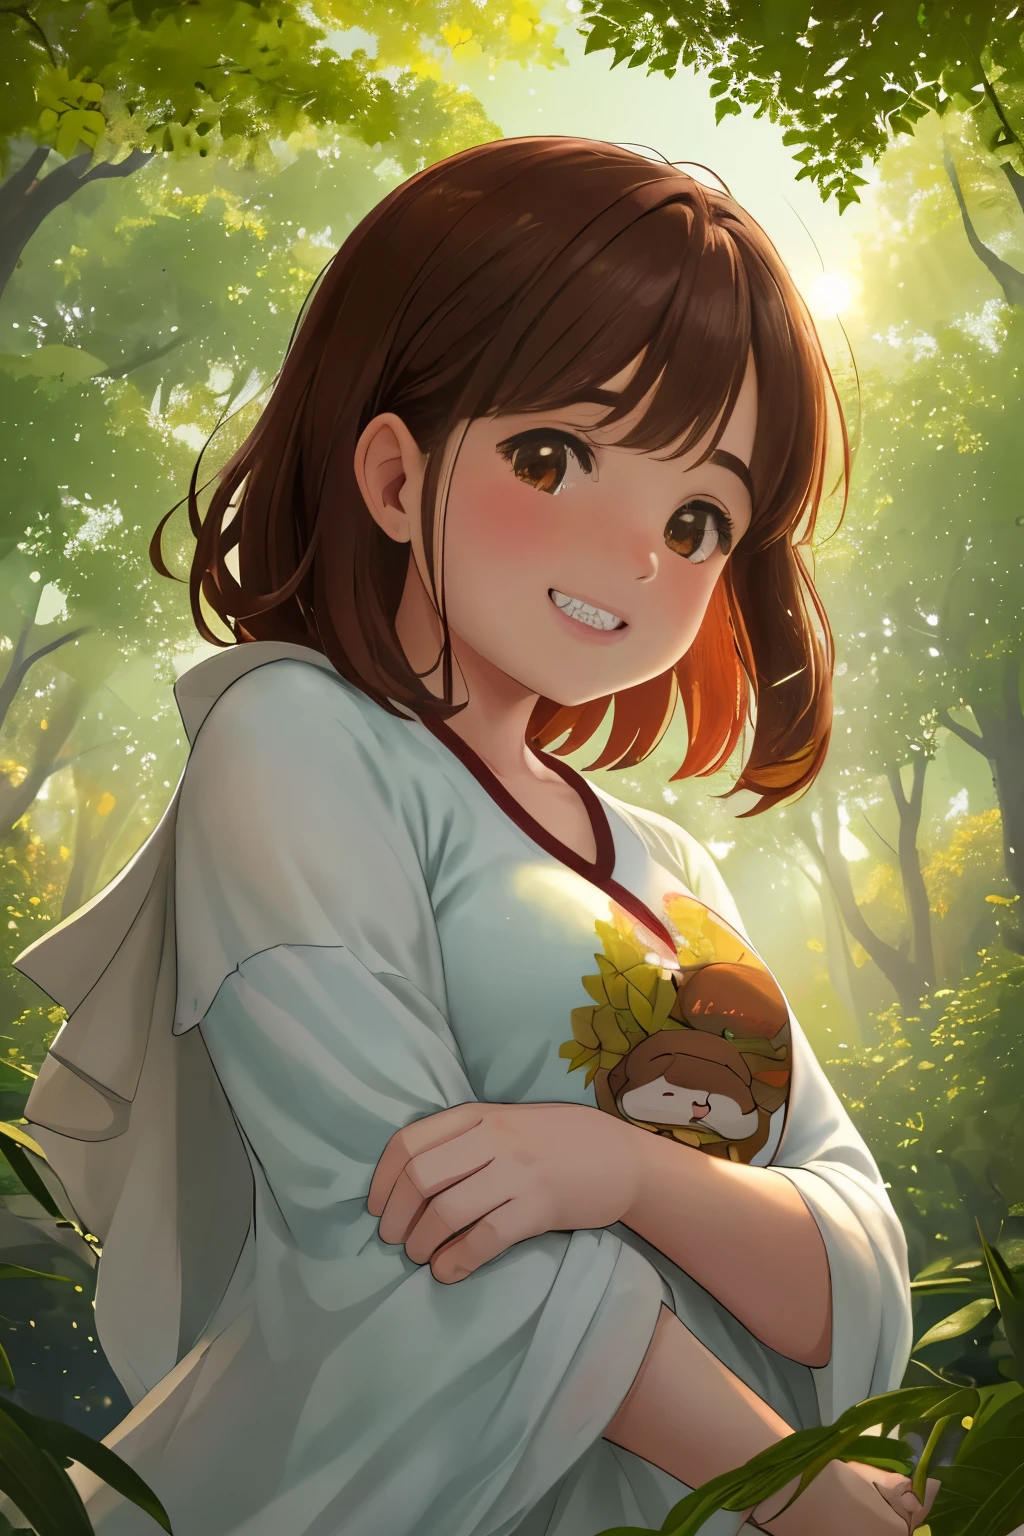 In the heart of a serene park, a chubby girl in a red soft jacket and black t-shirt sits on the lush, emerald-green grass, bathed in the golden sunlight filtering through the leaves of a nearby tree. The depth of field perfectly captures the subtle detail of her chubby face, adorned with a toothy smile and rosy cheeks that seem to reflect the warmth of the sun. Her red brown eyes, as intricately detailed as the eyes of a god, gaze intently at the viewer, creating an unbreakable connection.

The gentle breeze stirs the air, and with it, light particles dance around her, casting a soft, ethereal